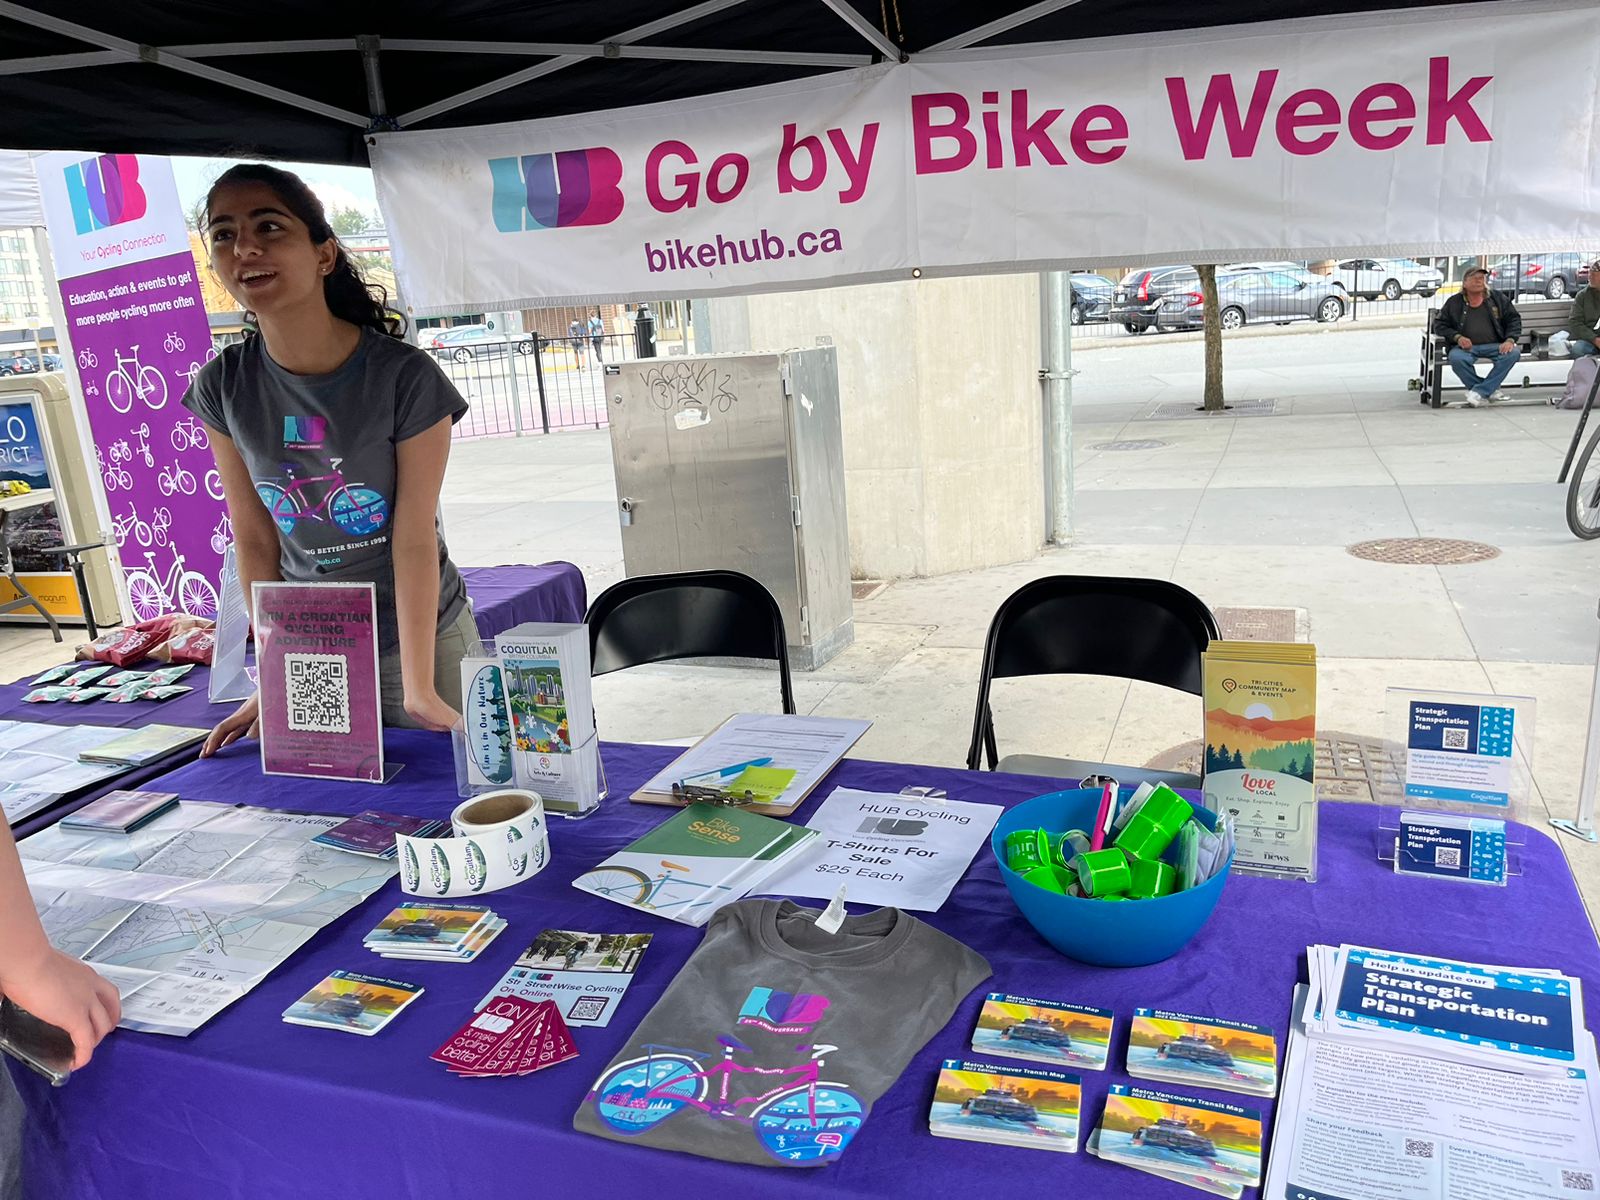 A young woman in her twenties stand behind an information booth at an event promoting safe cycling 